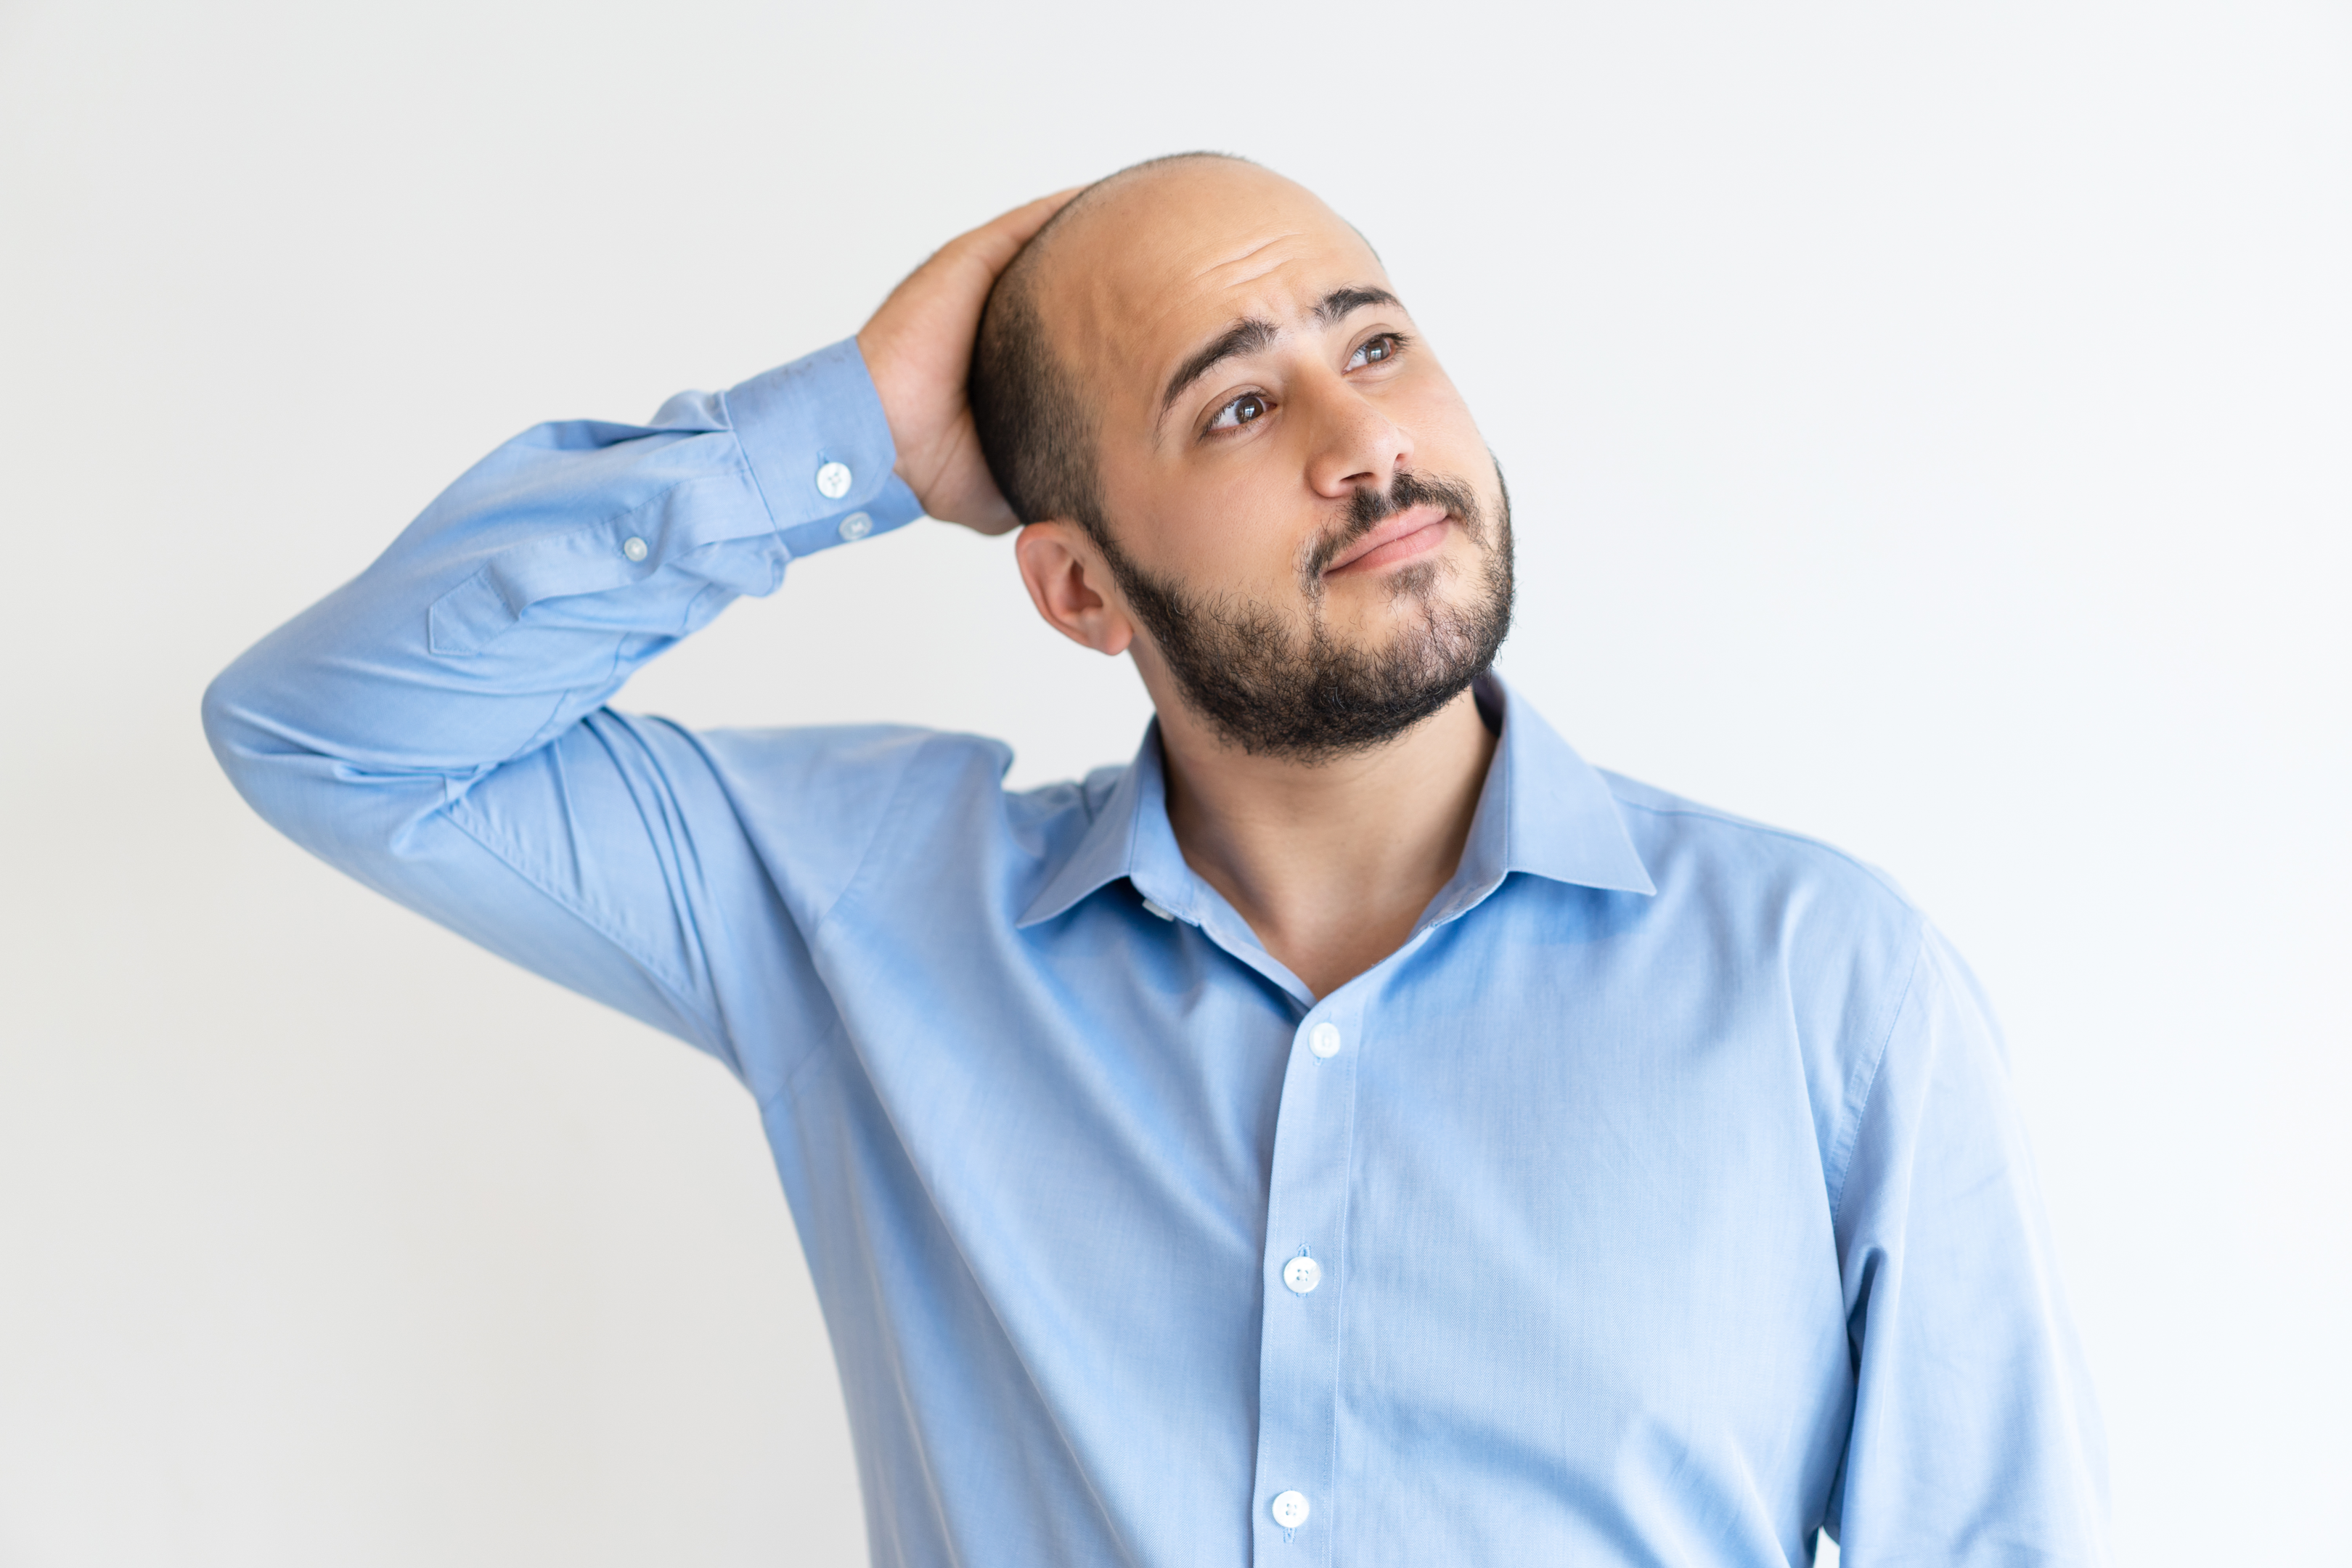 Male pattern baldness is often the most common cause of hair loss in men.